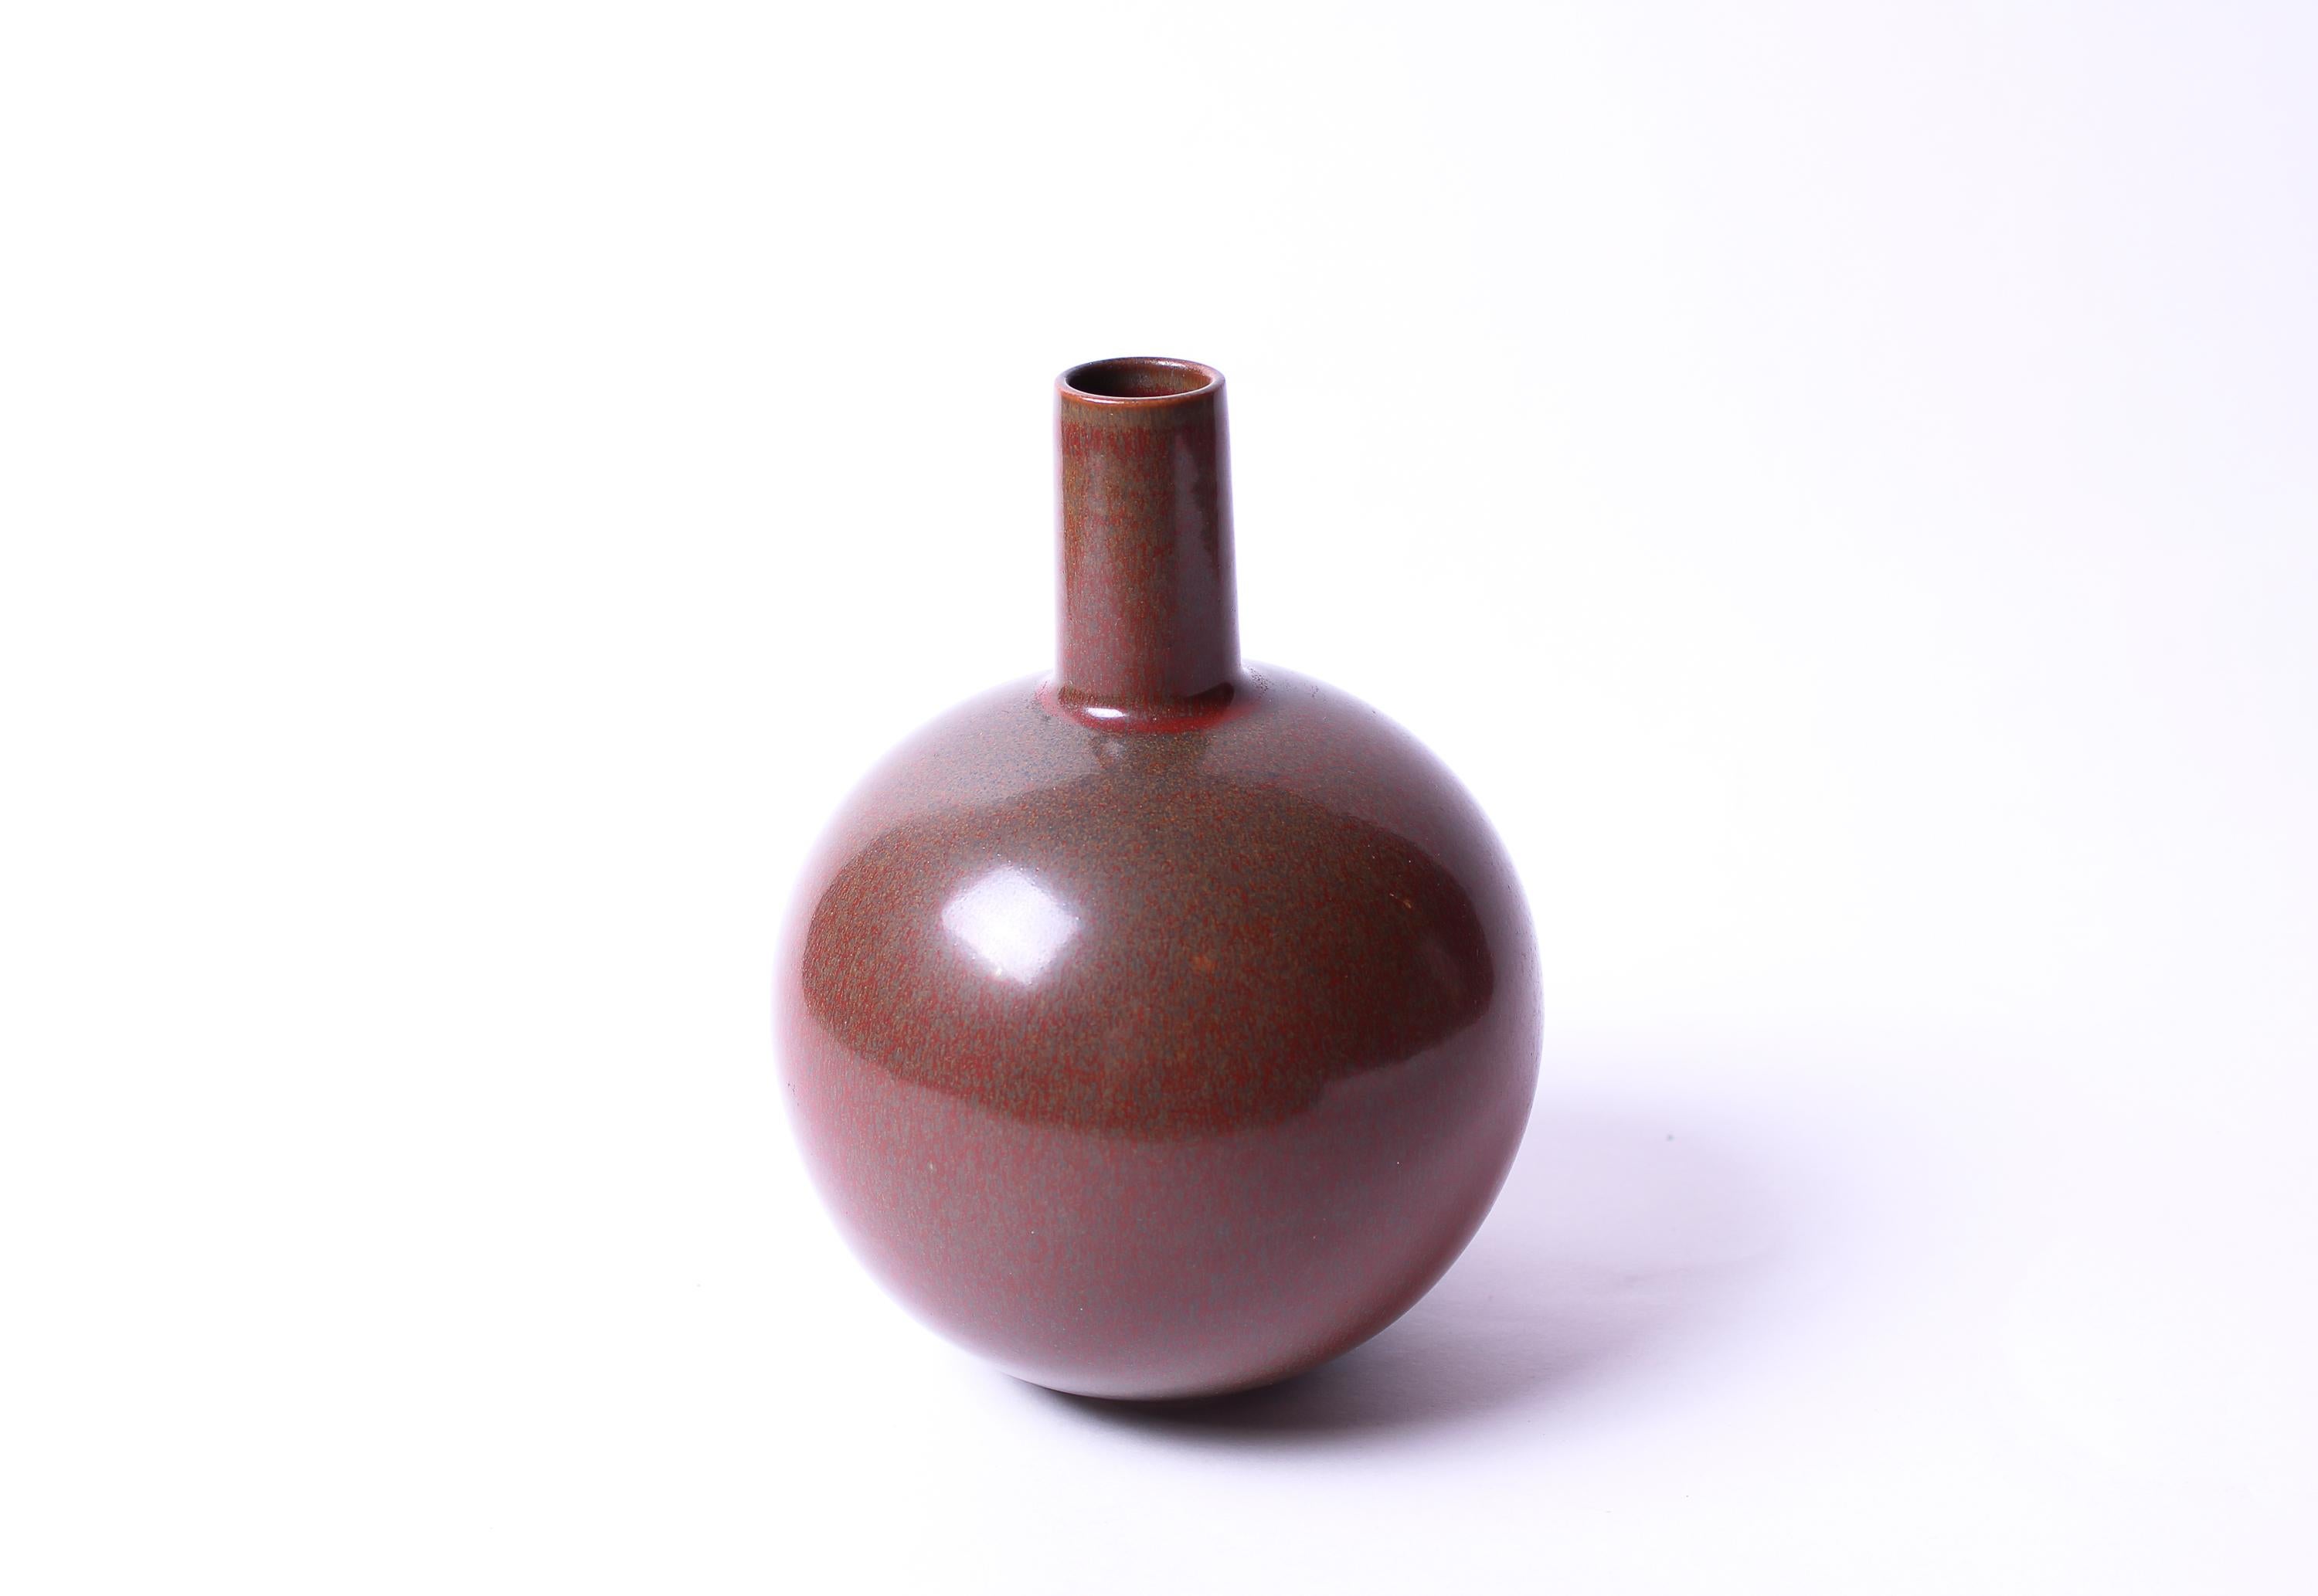 A midcentury ceramic vase by Eje Öberg. Made by the artist at Studio Gustavsberg in 1956 and signed with both signature and the 